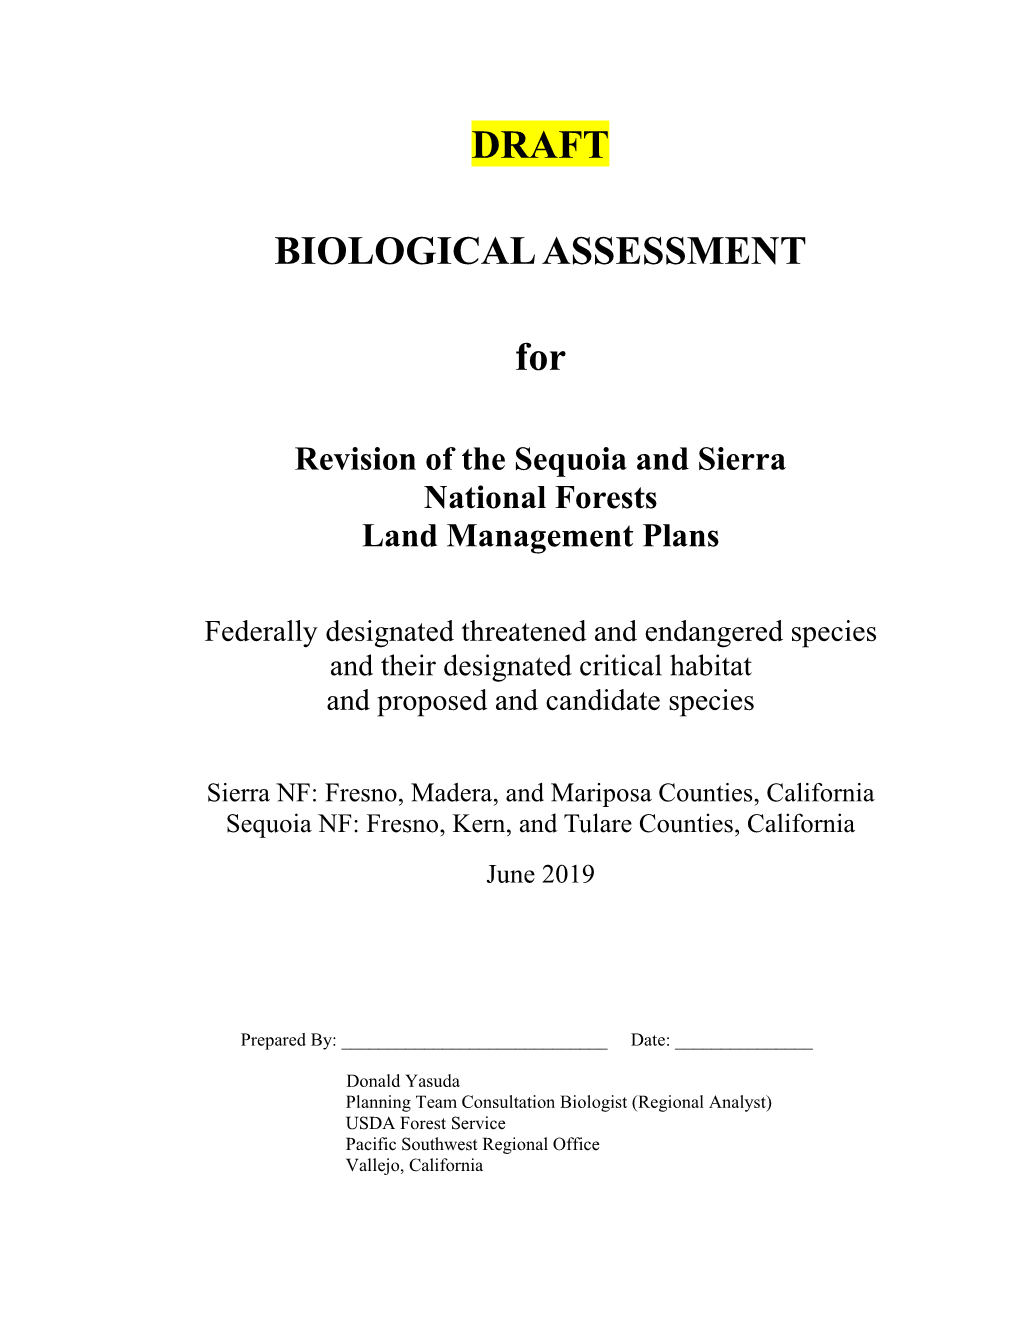 DRAFT Biological Assessment for Sequoia and Sierra Nfs Forest